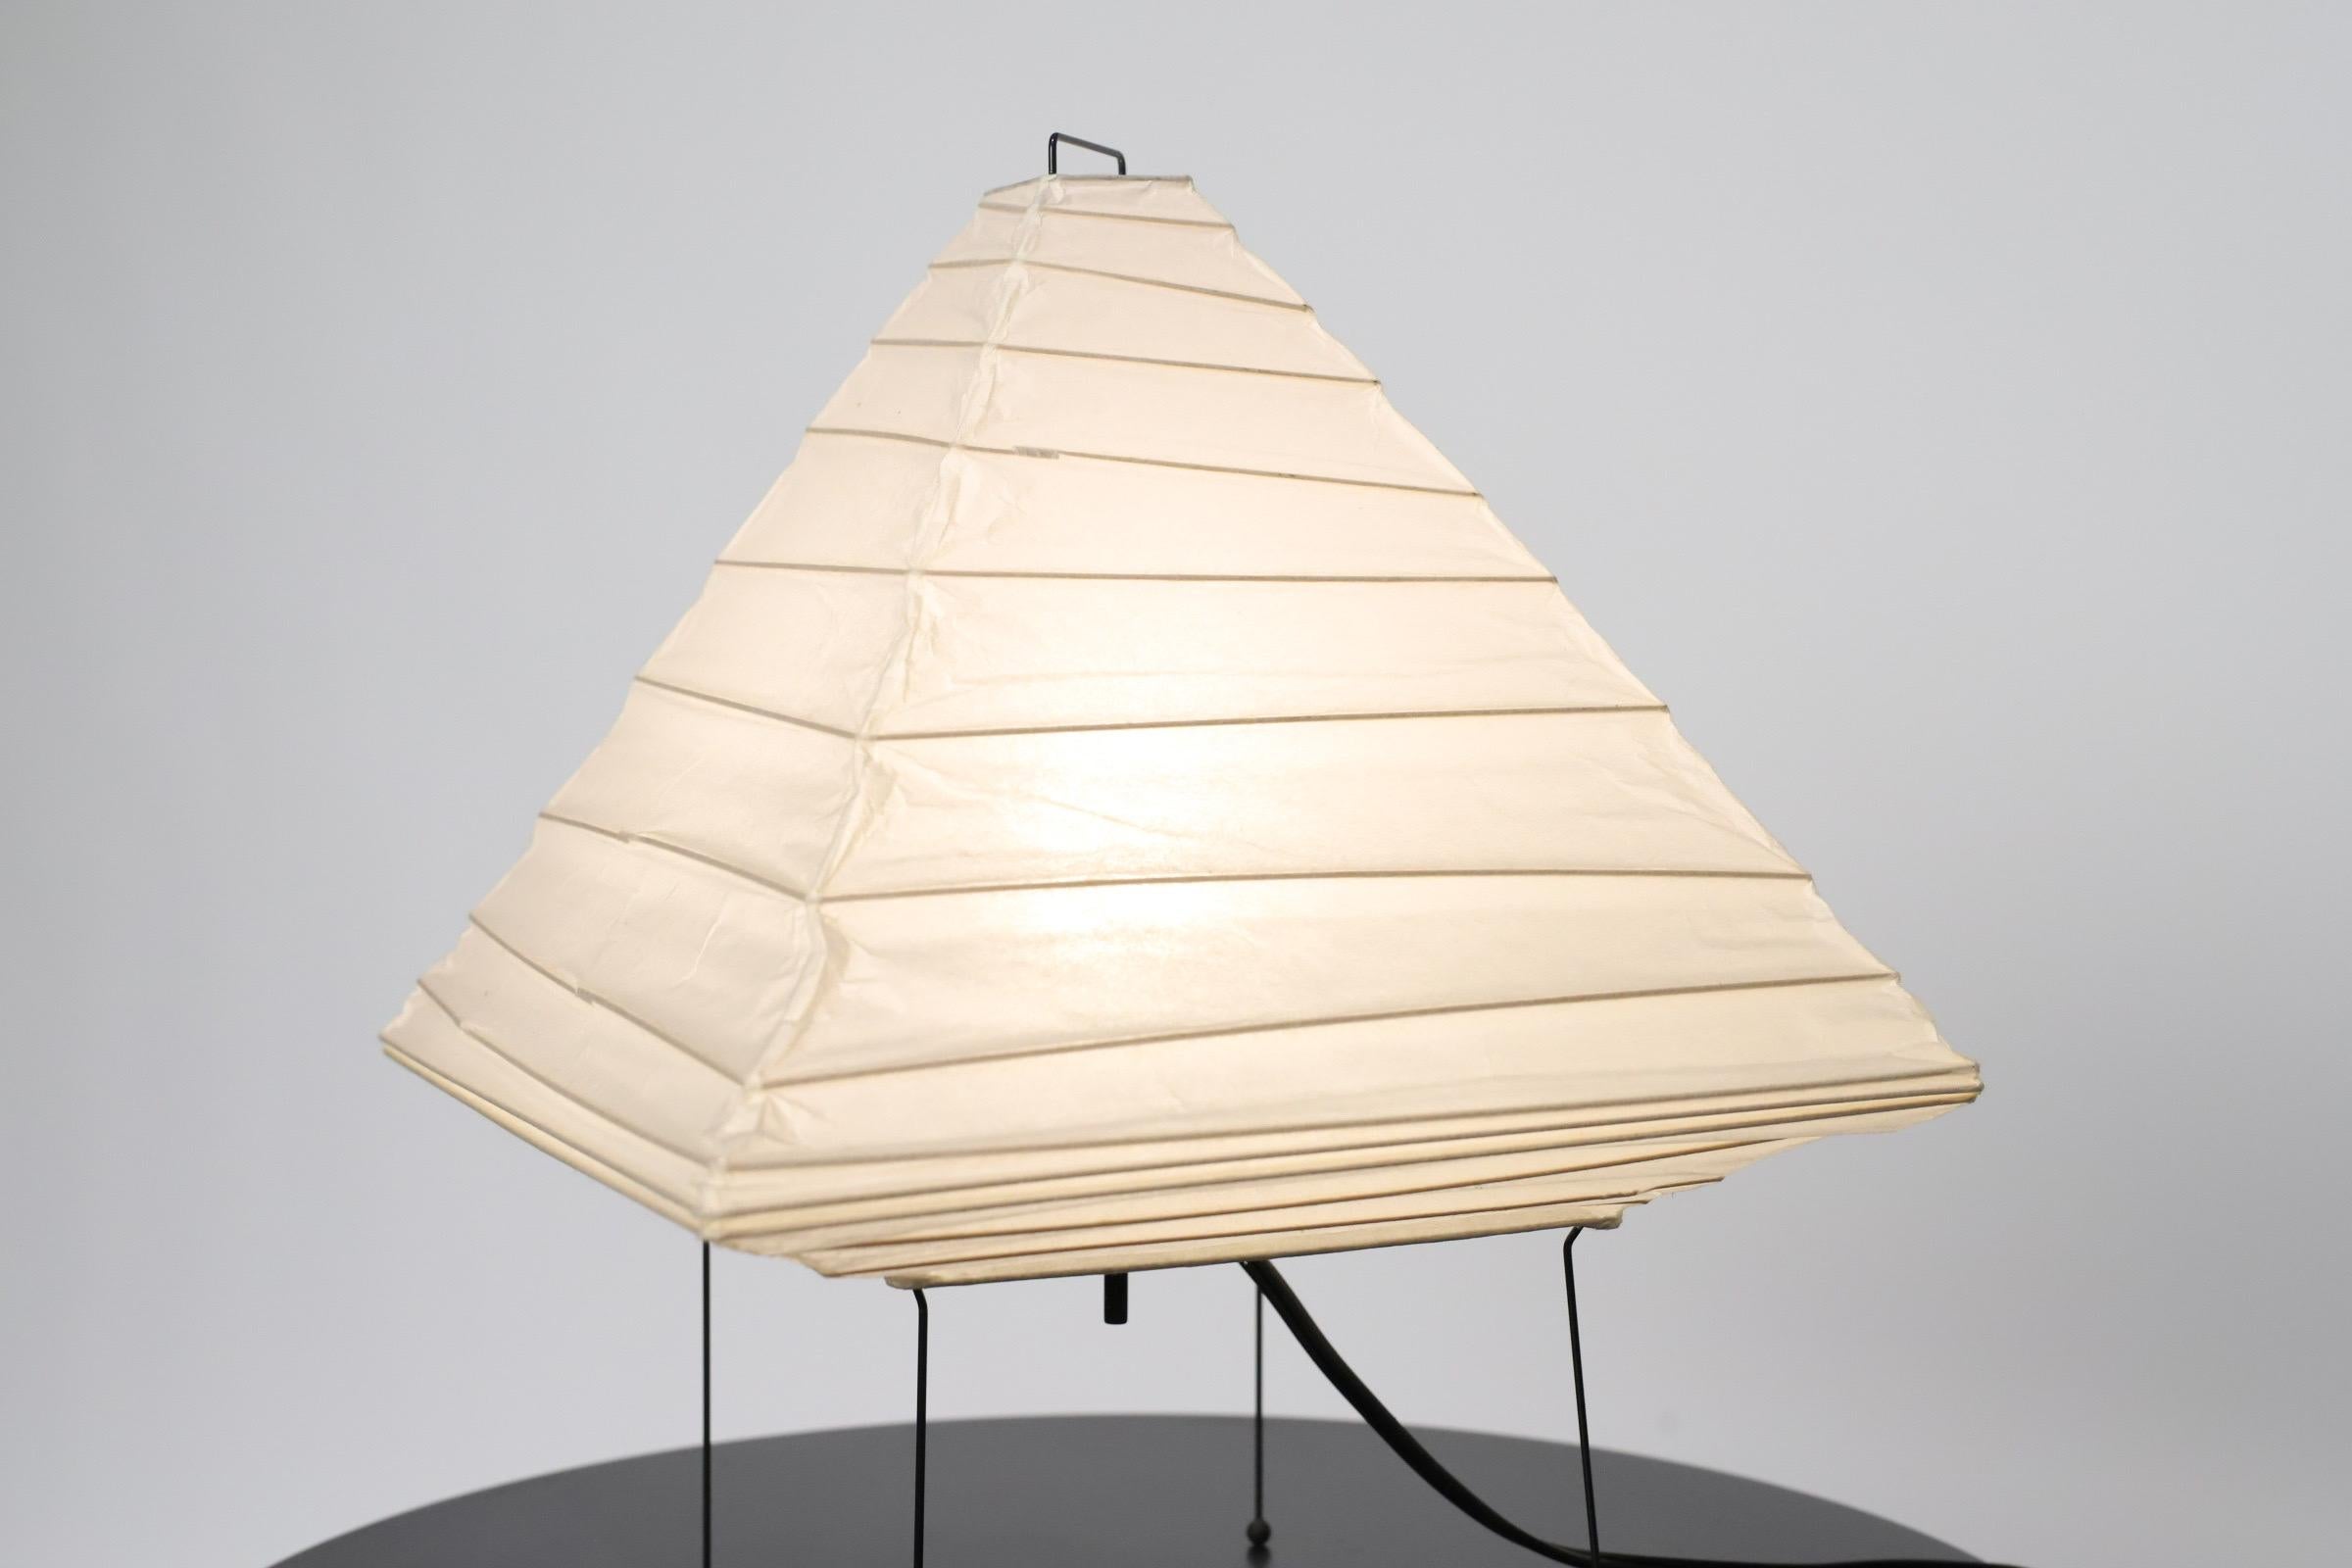 Akari Model 5x light sculpture by Isamu Noguchi. The shade is made from handmade washi paper and bamboo ribs with Noguchi Akari manufacturer's stamp. Akari light sculptures by Isamu Noguchi are considered icons of 1950s modern design. Designed by